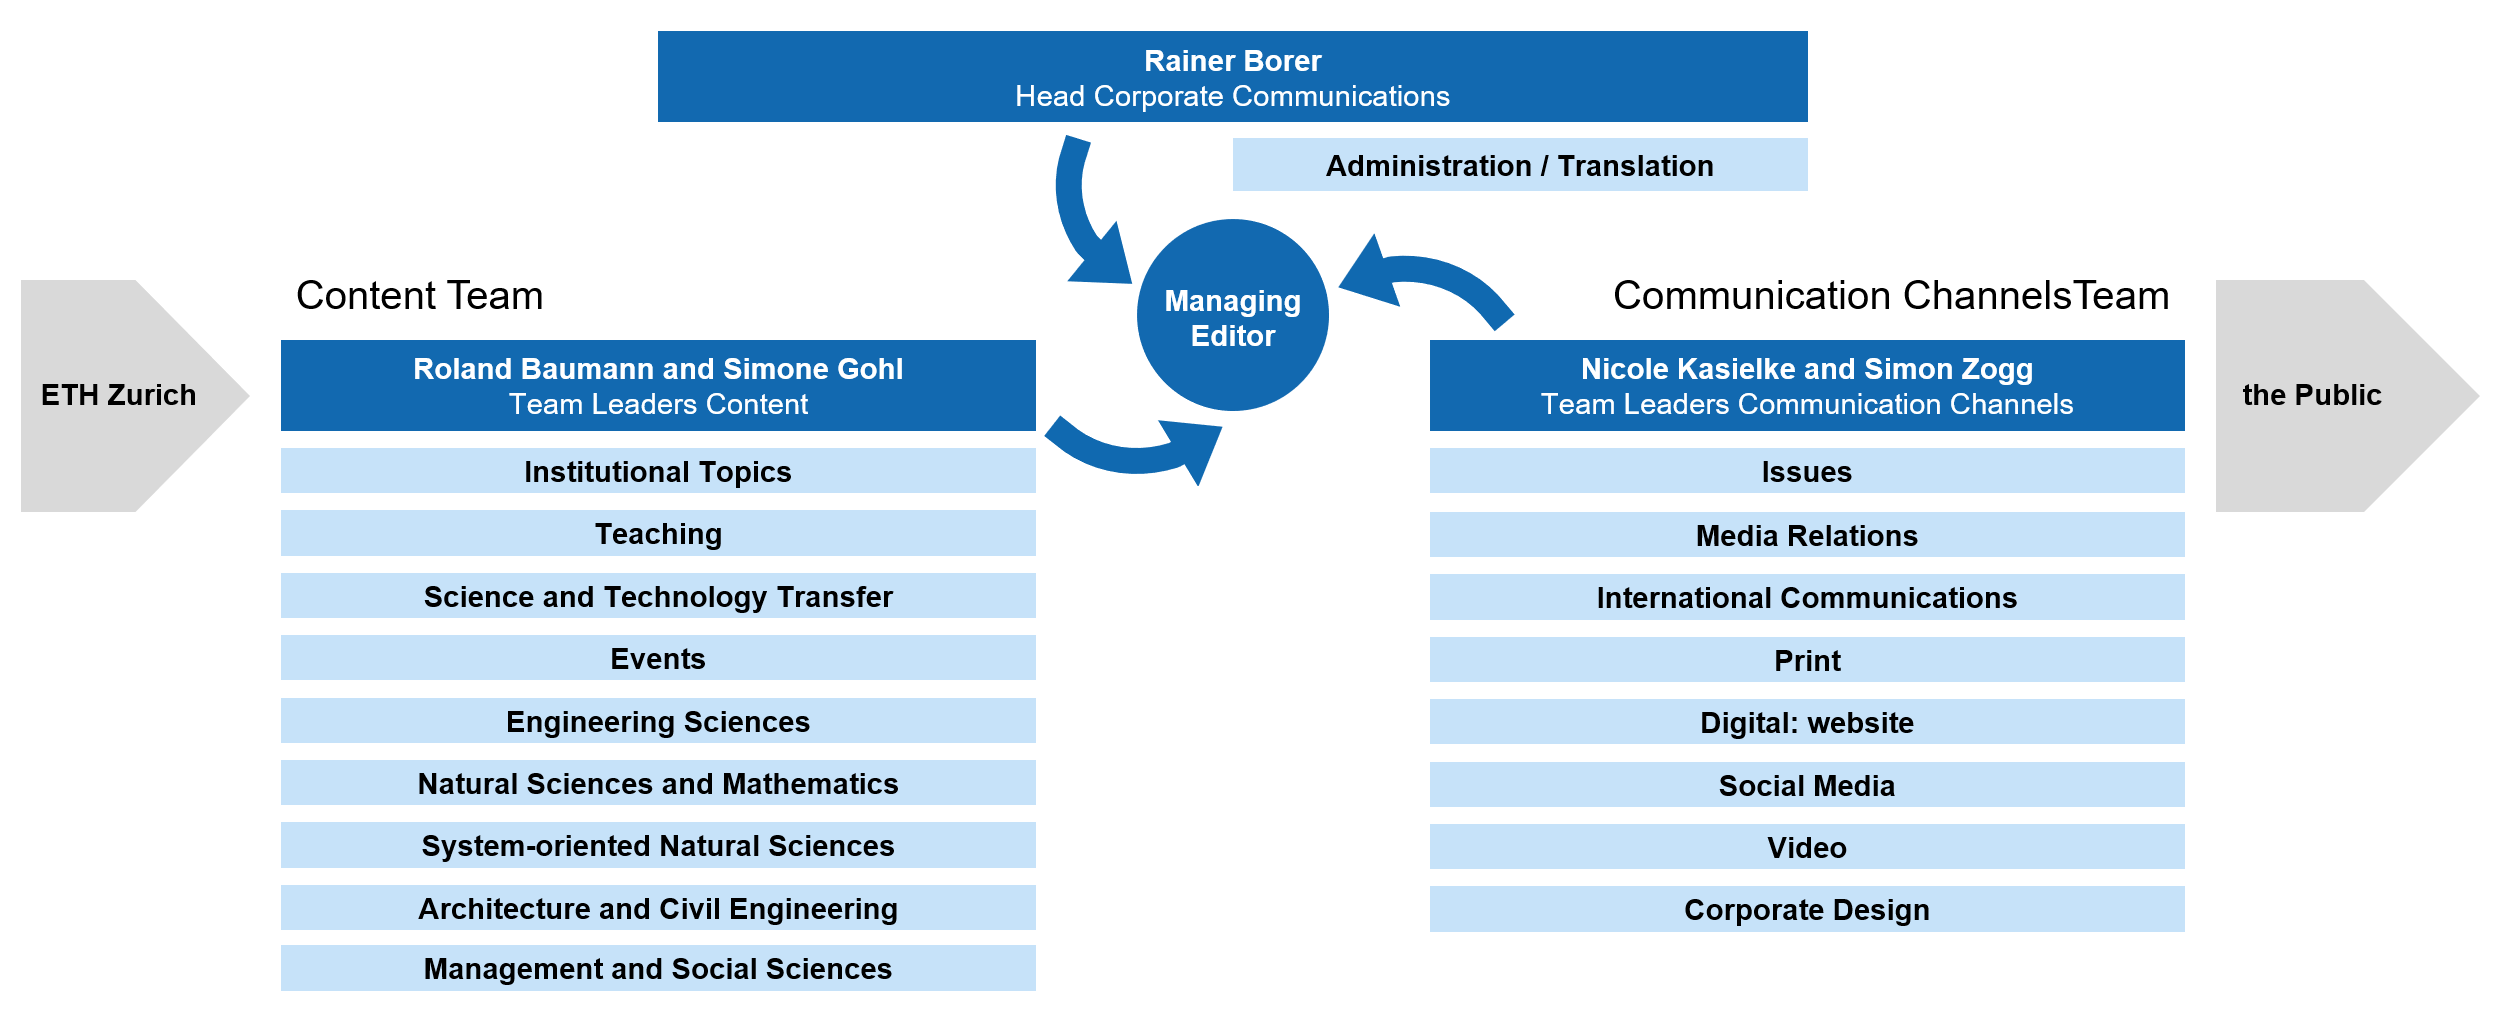 Enlarged view: Corporate Communications organisational chart